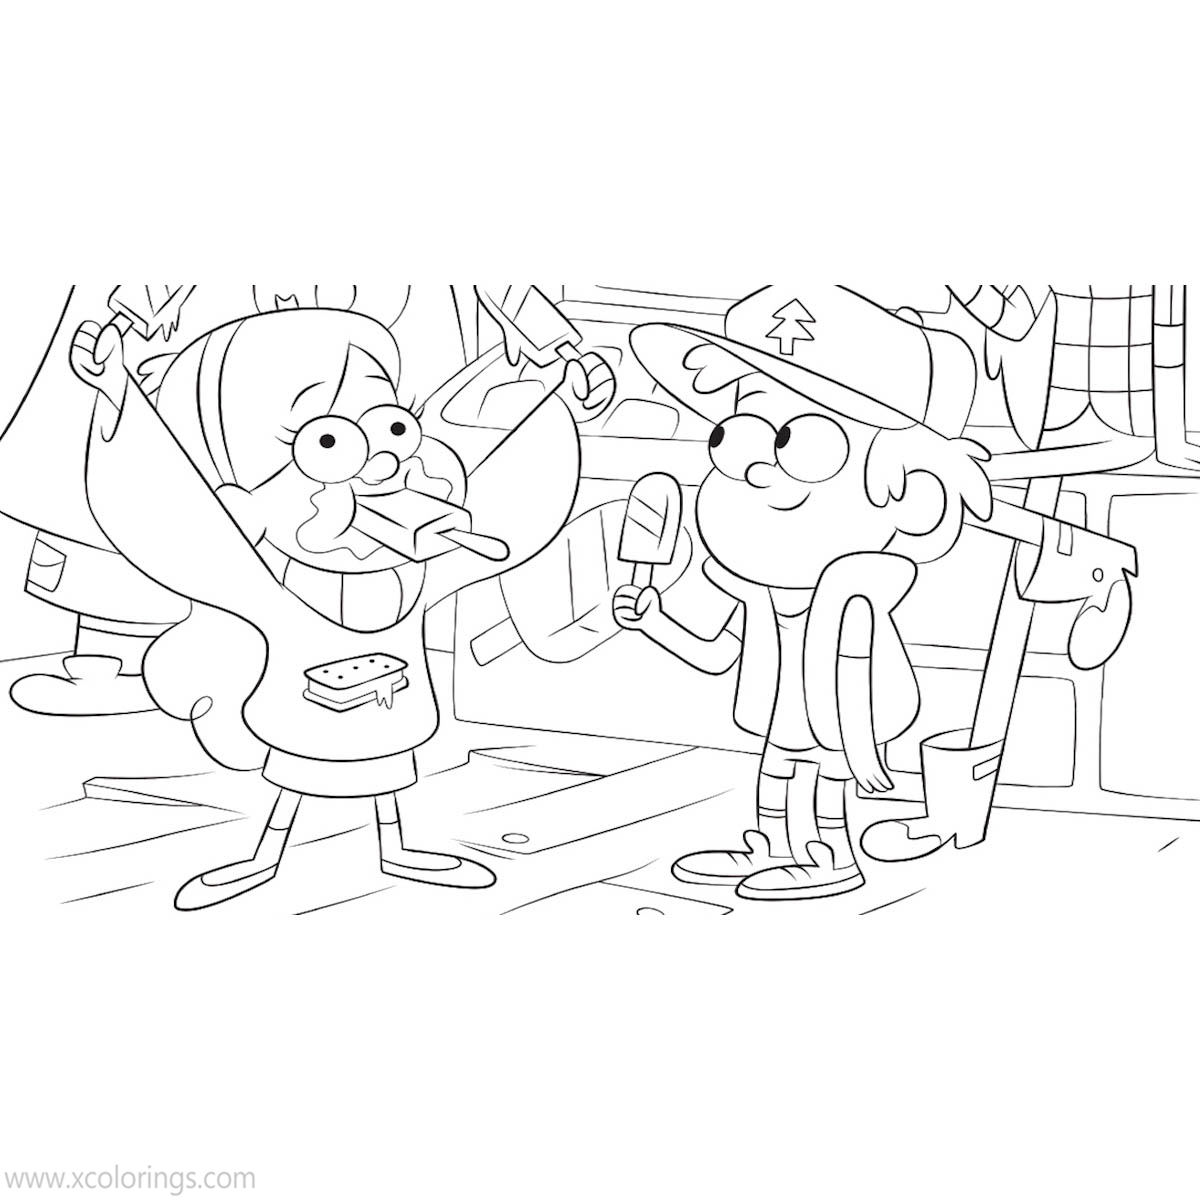 Free Gravity Falls Coloring Pages Mabel and Dipper Having Popsicle printable